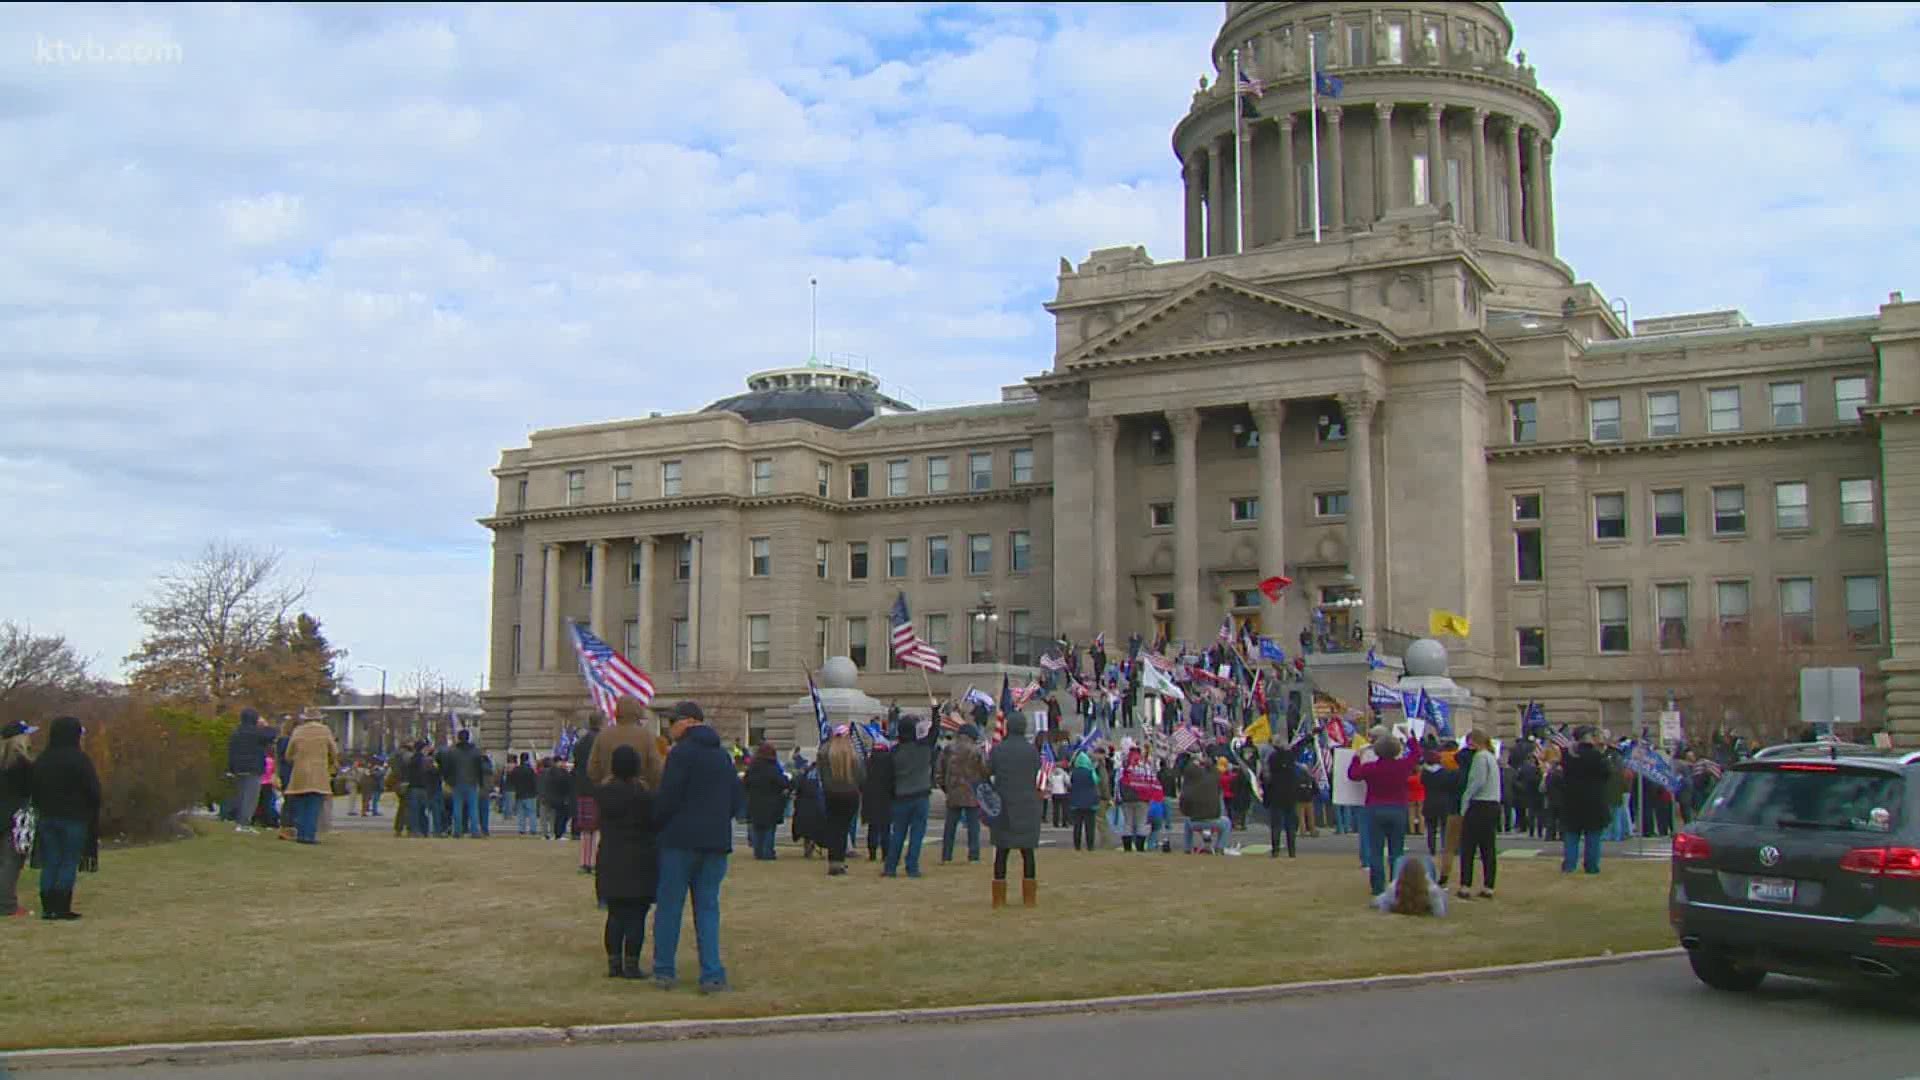 Hundreds have gathered in front of the Idaho Capitol building as Congress prepares to affirm President-elect Joe Biden's victory.